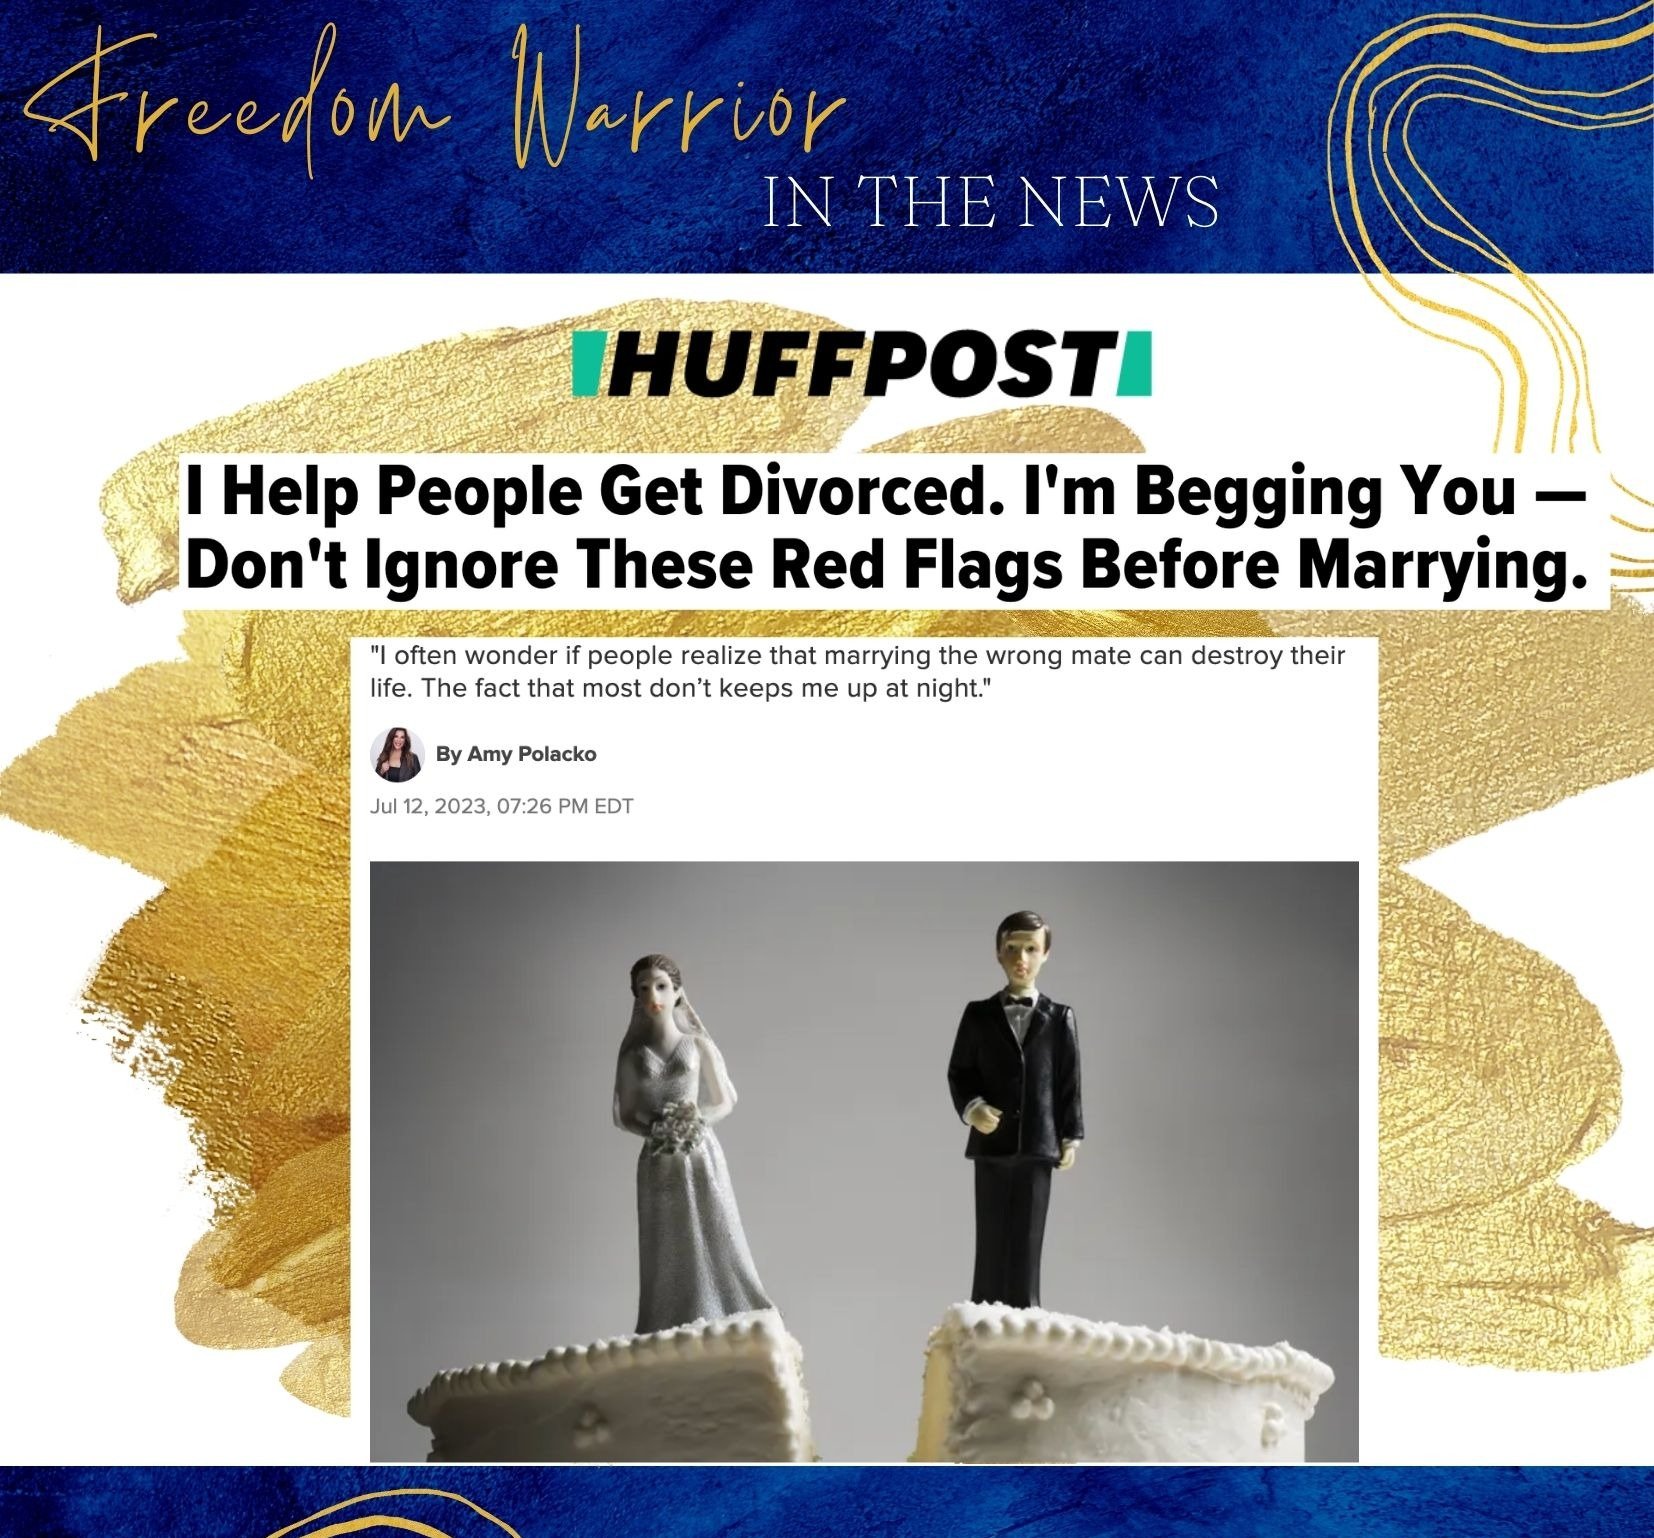 I Help People Get Divorced. I'm Begging You — Don't Ignore These Red Flags Before Marrying.